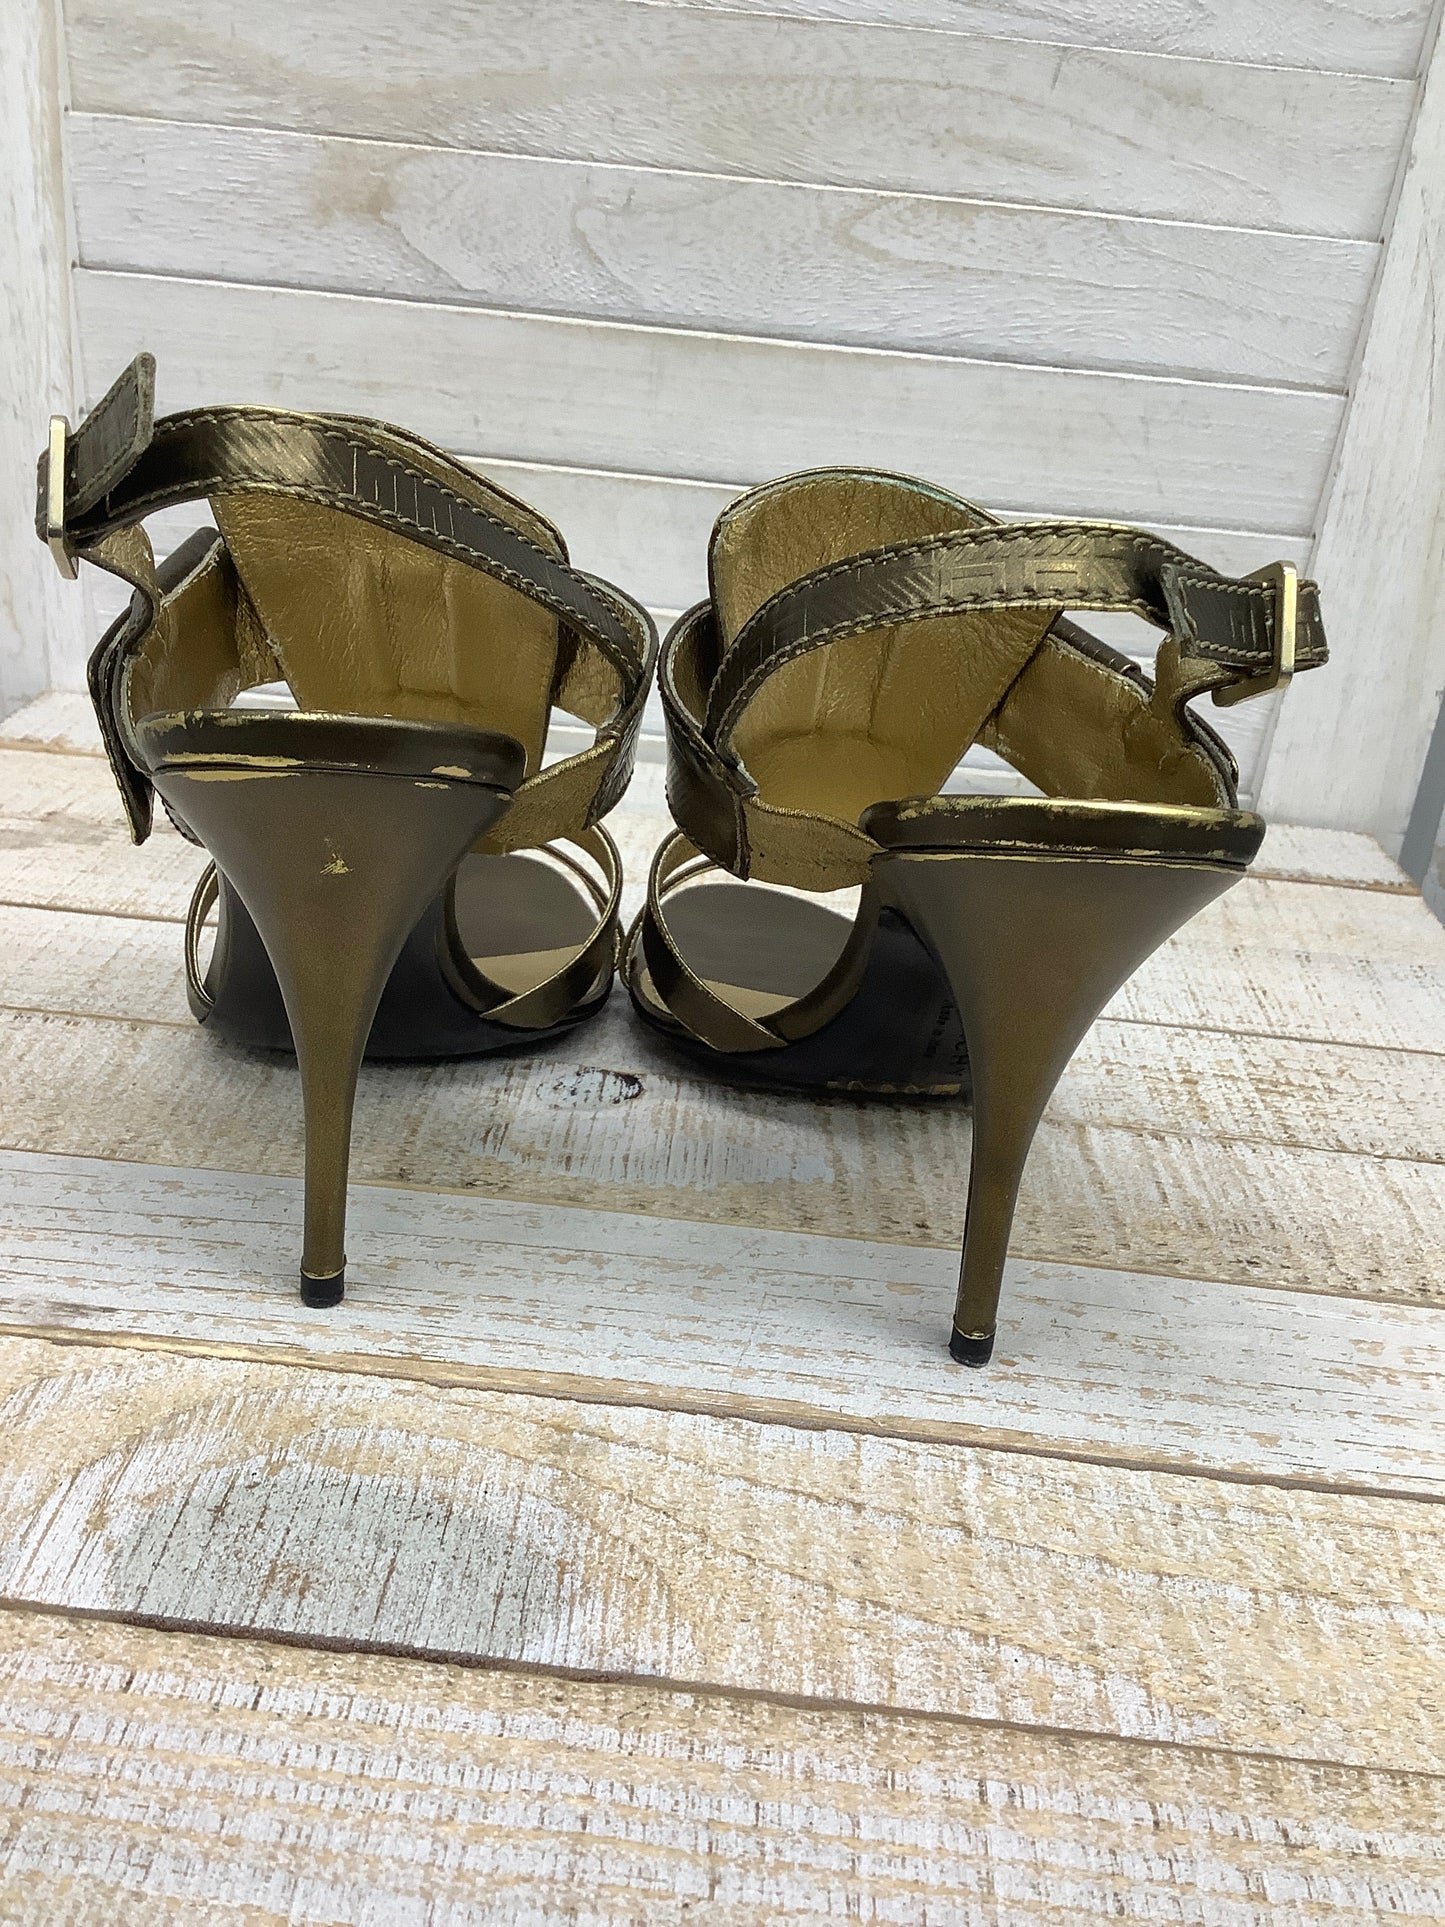 Sandals Heels Stiletto By Givenchy  Size: 7